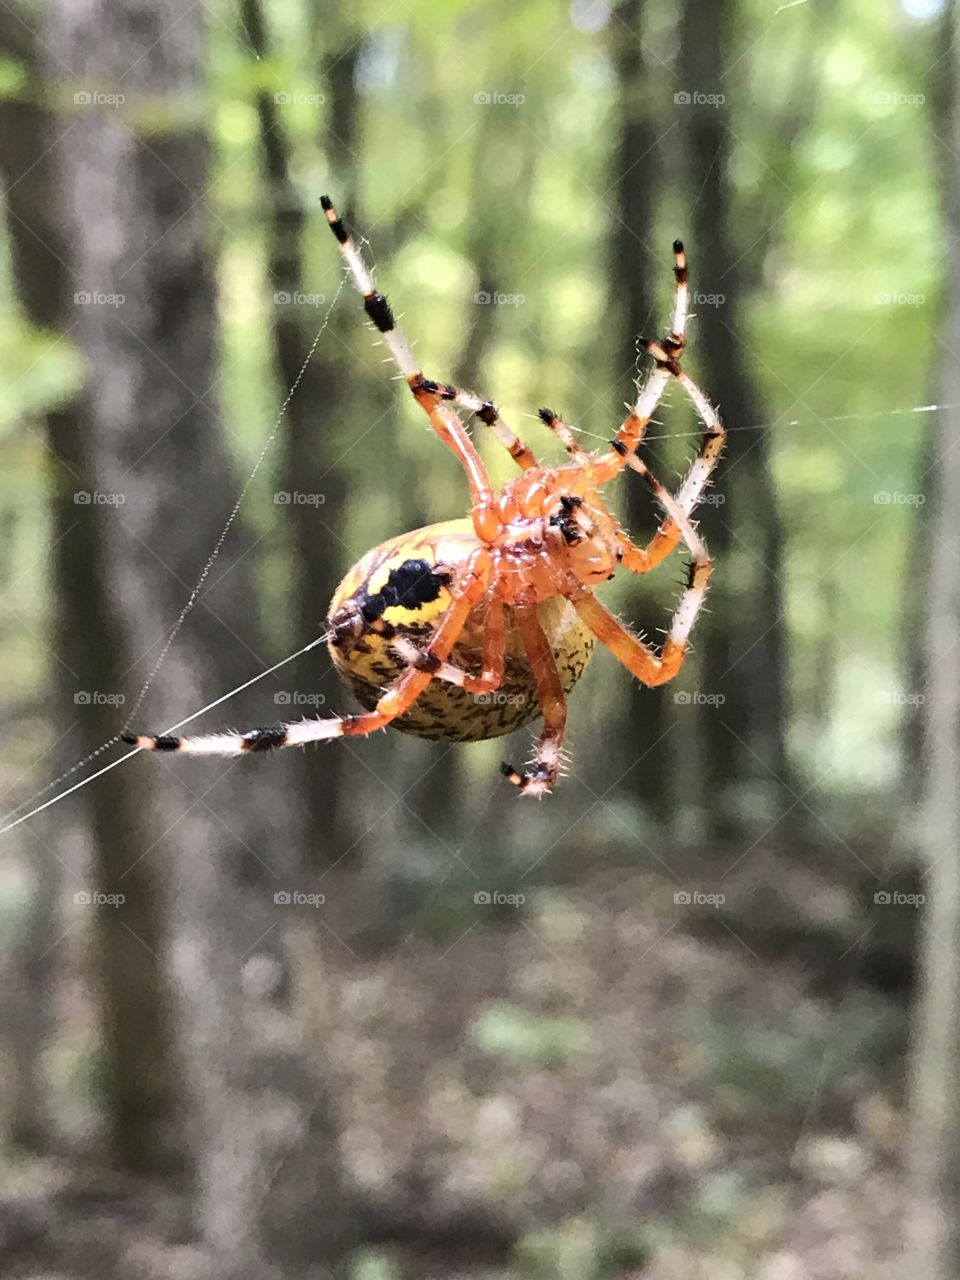 Cone weaver spider weaving its web. 